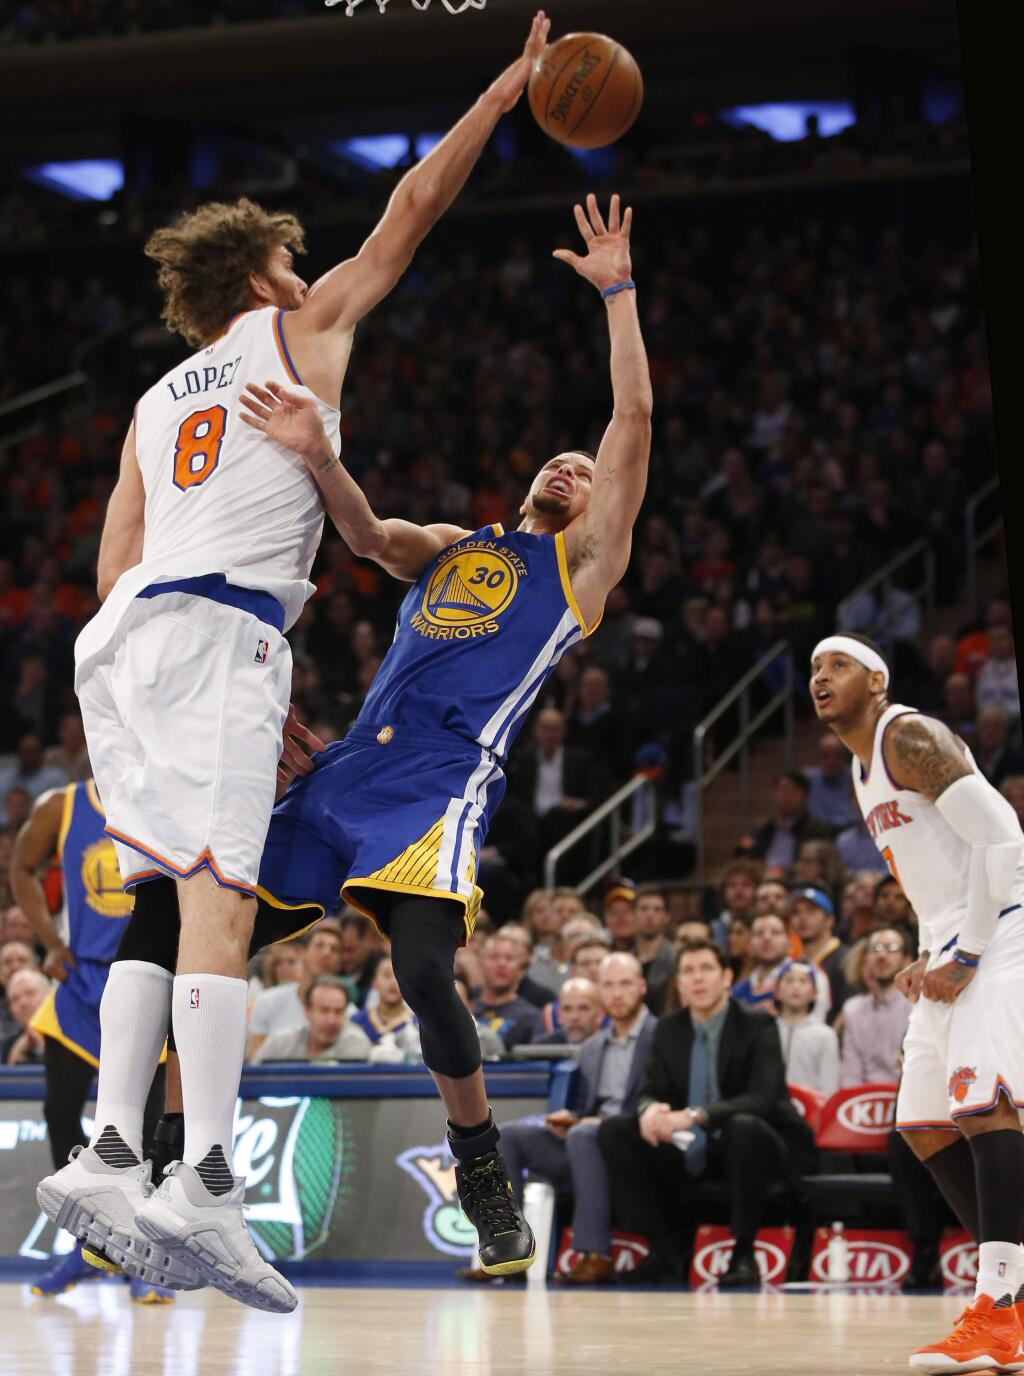 New York Knicks center Robin Lopez (8) blocks a shot by Golden State Warriors guard Stephen Curry (30) in the first half of an NBA basketball game at Madison Square Garden in New York, Sunday, Jan. 31, 2016. (AP Photo/Kathy Willens)